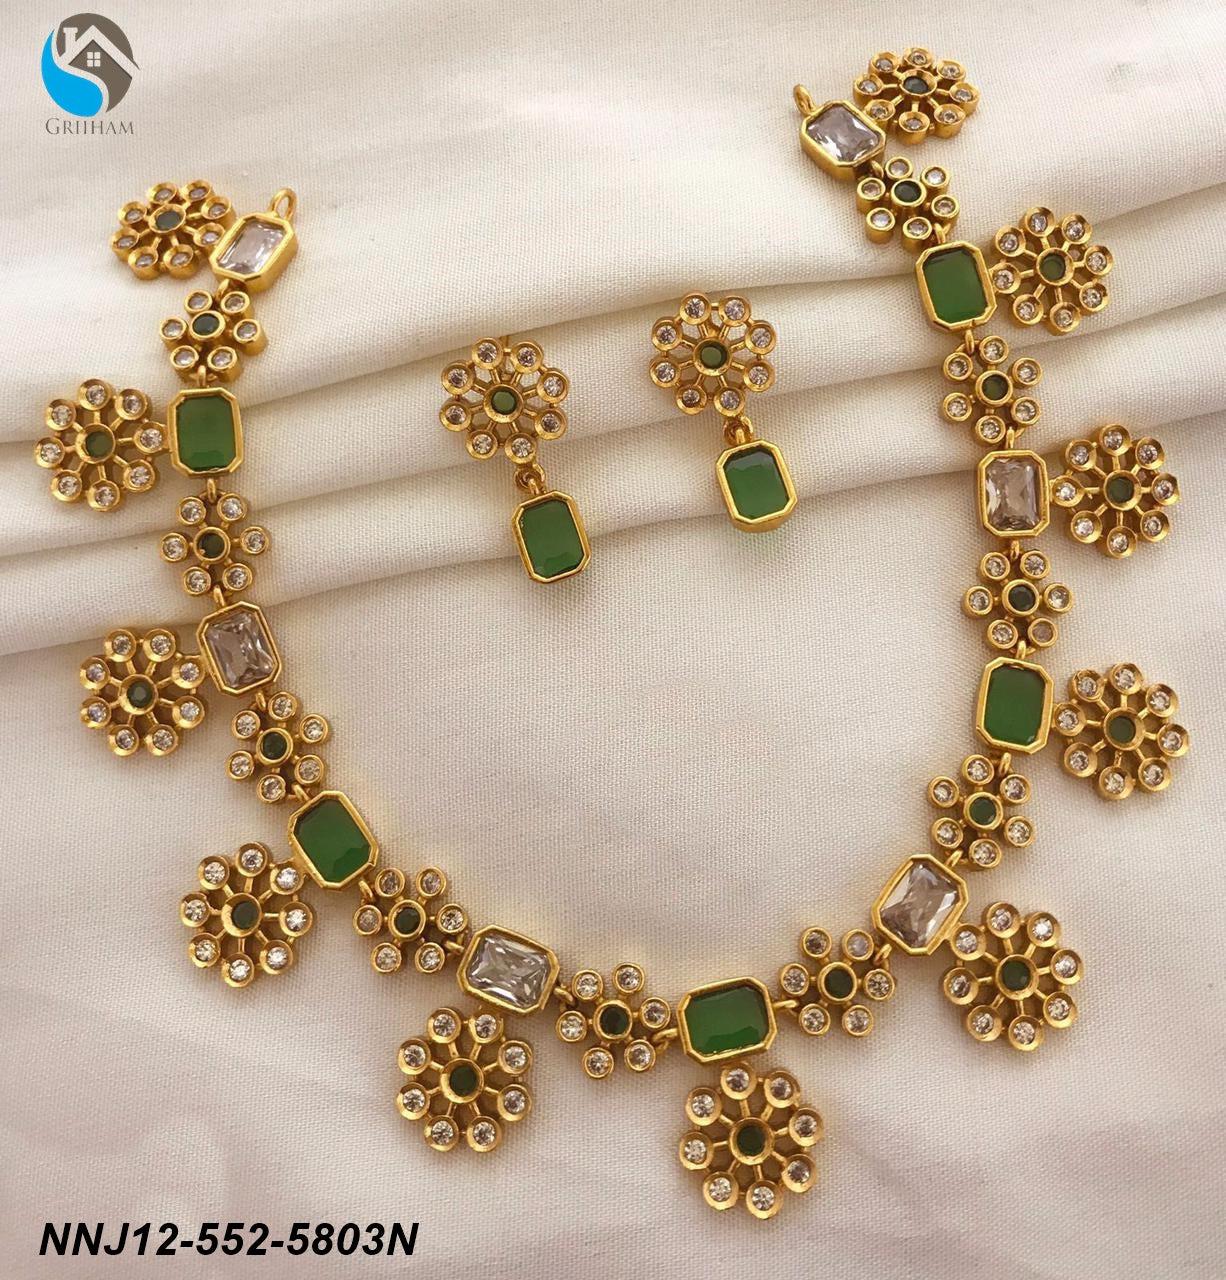 Premium Quality Short necklace set with Green and cz Stones floral motif 5803n